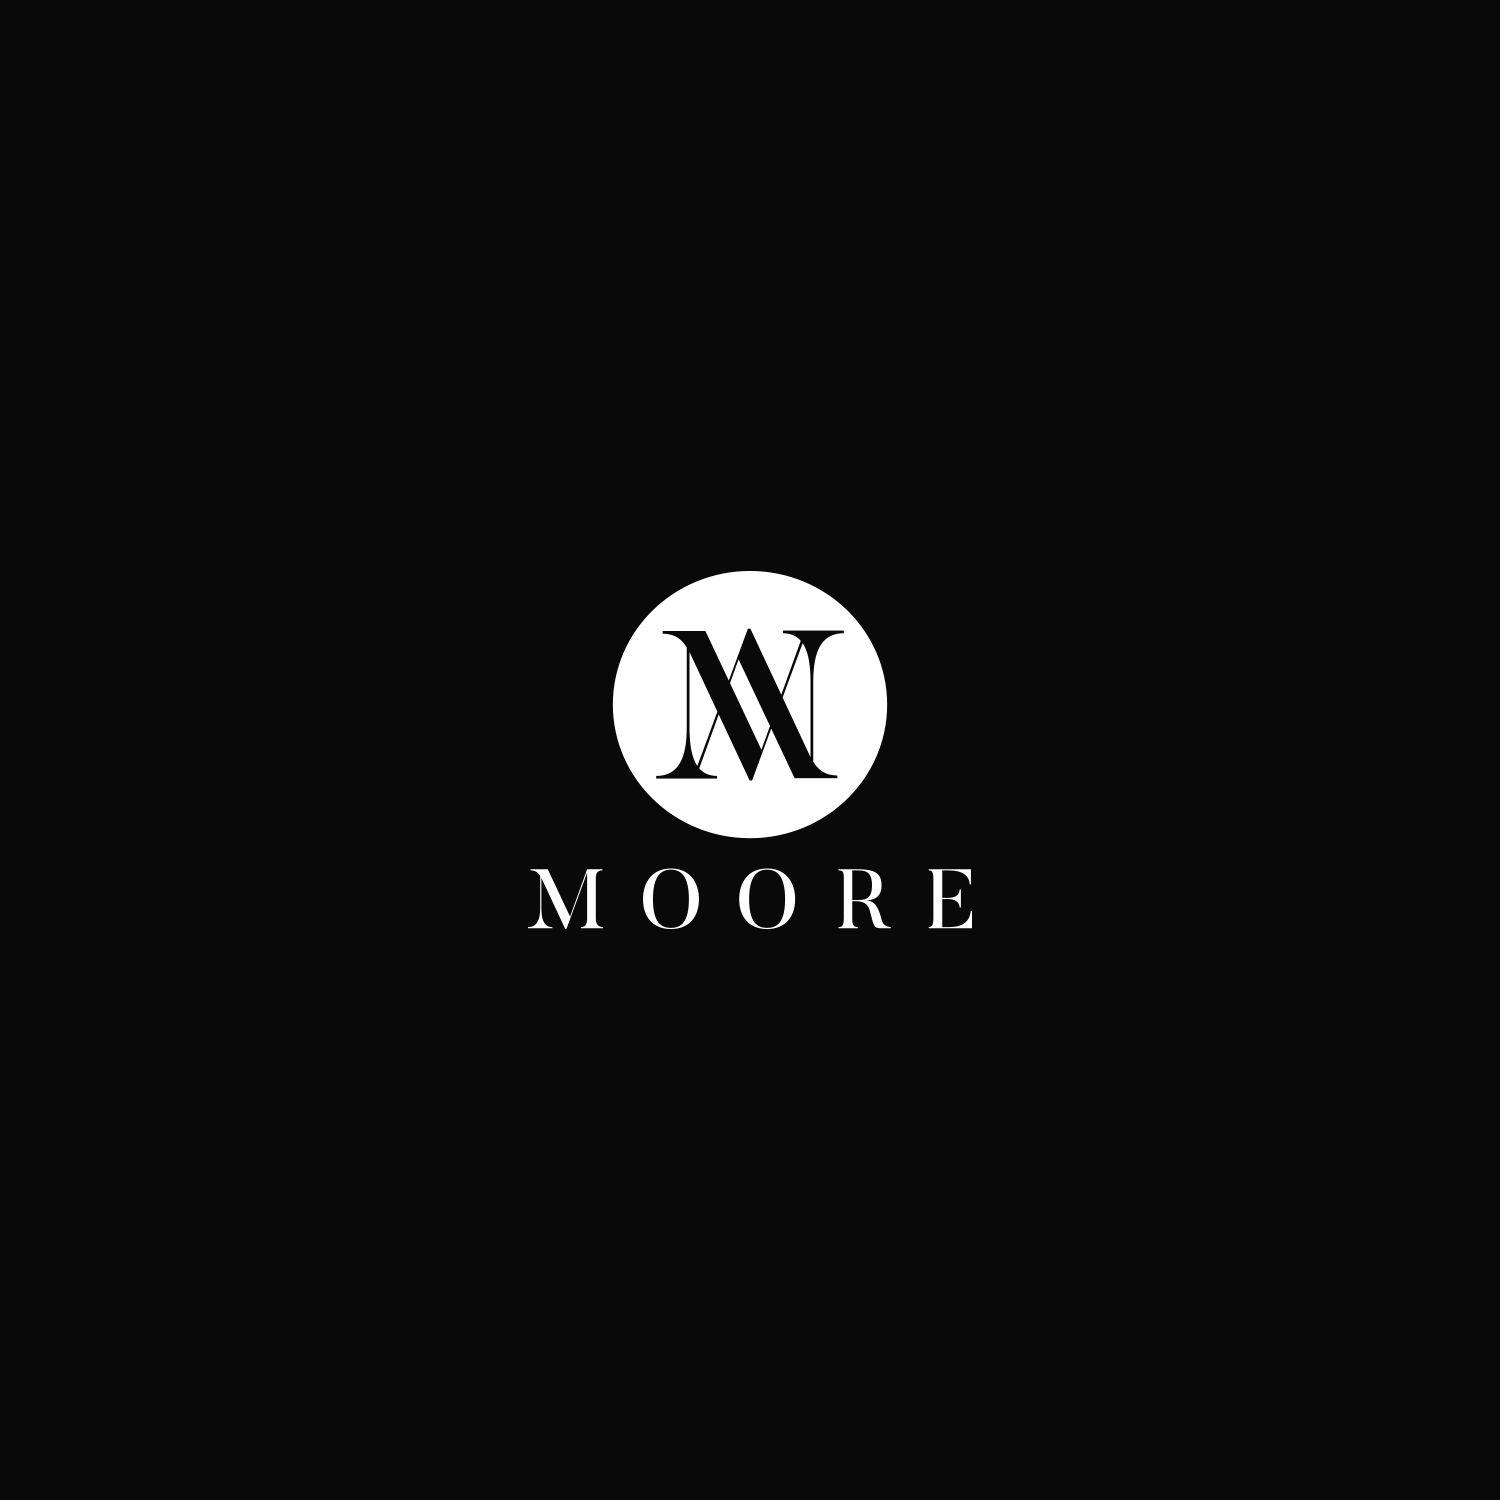 Moore Logo - Upmarket, Serious, It Company Logo Design for Moore Watch Co by M ...